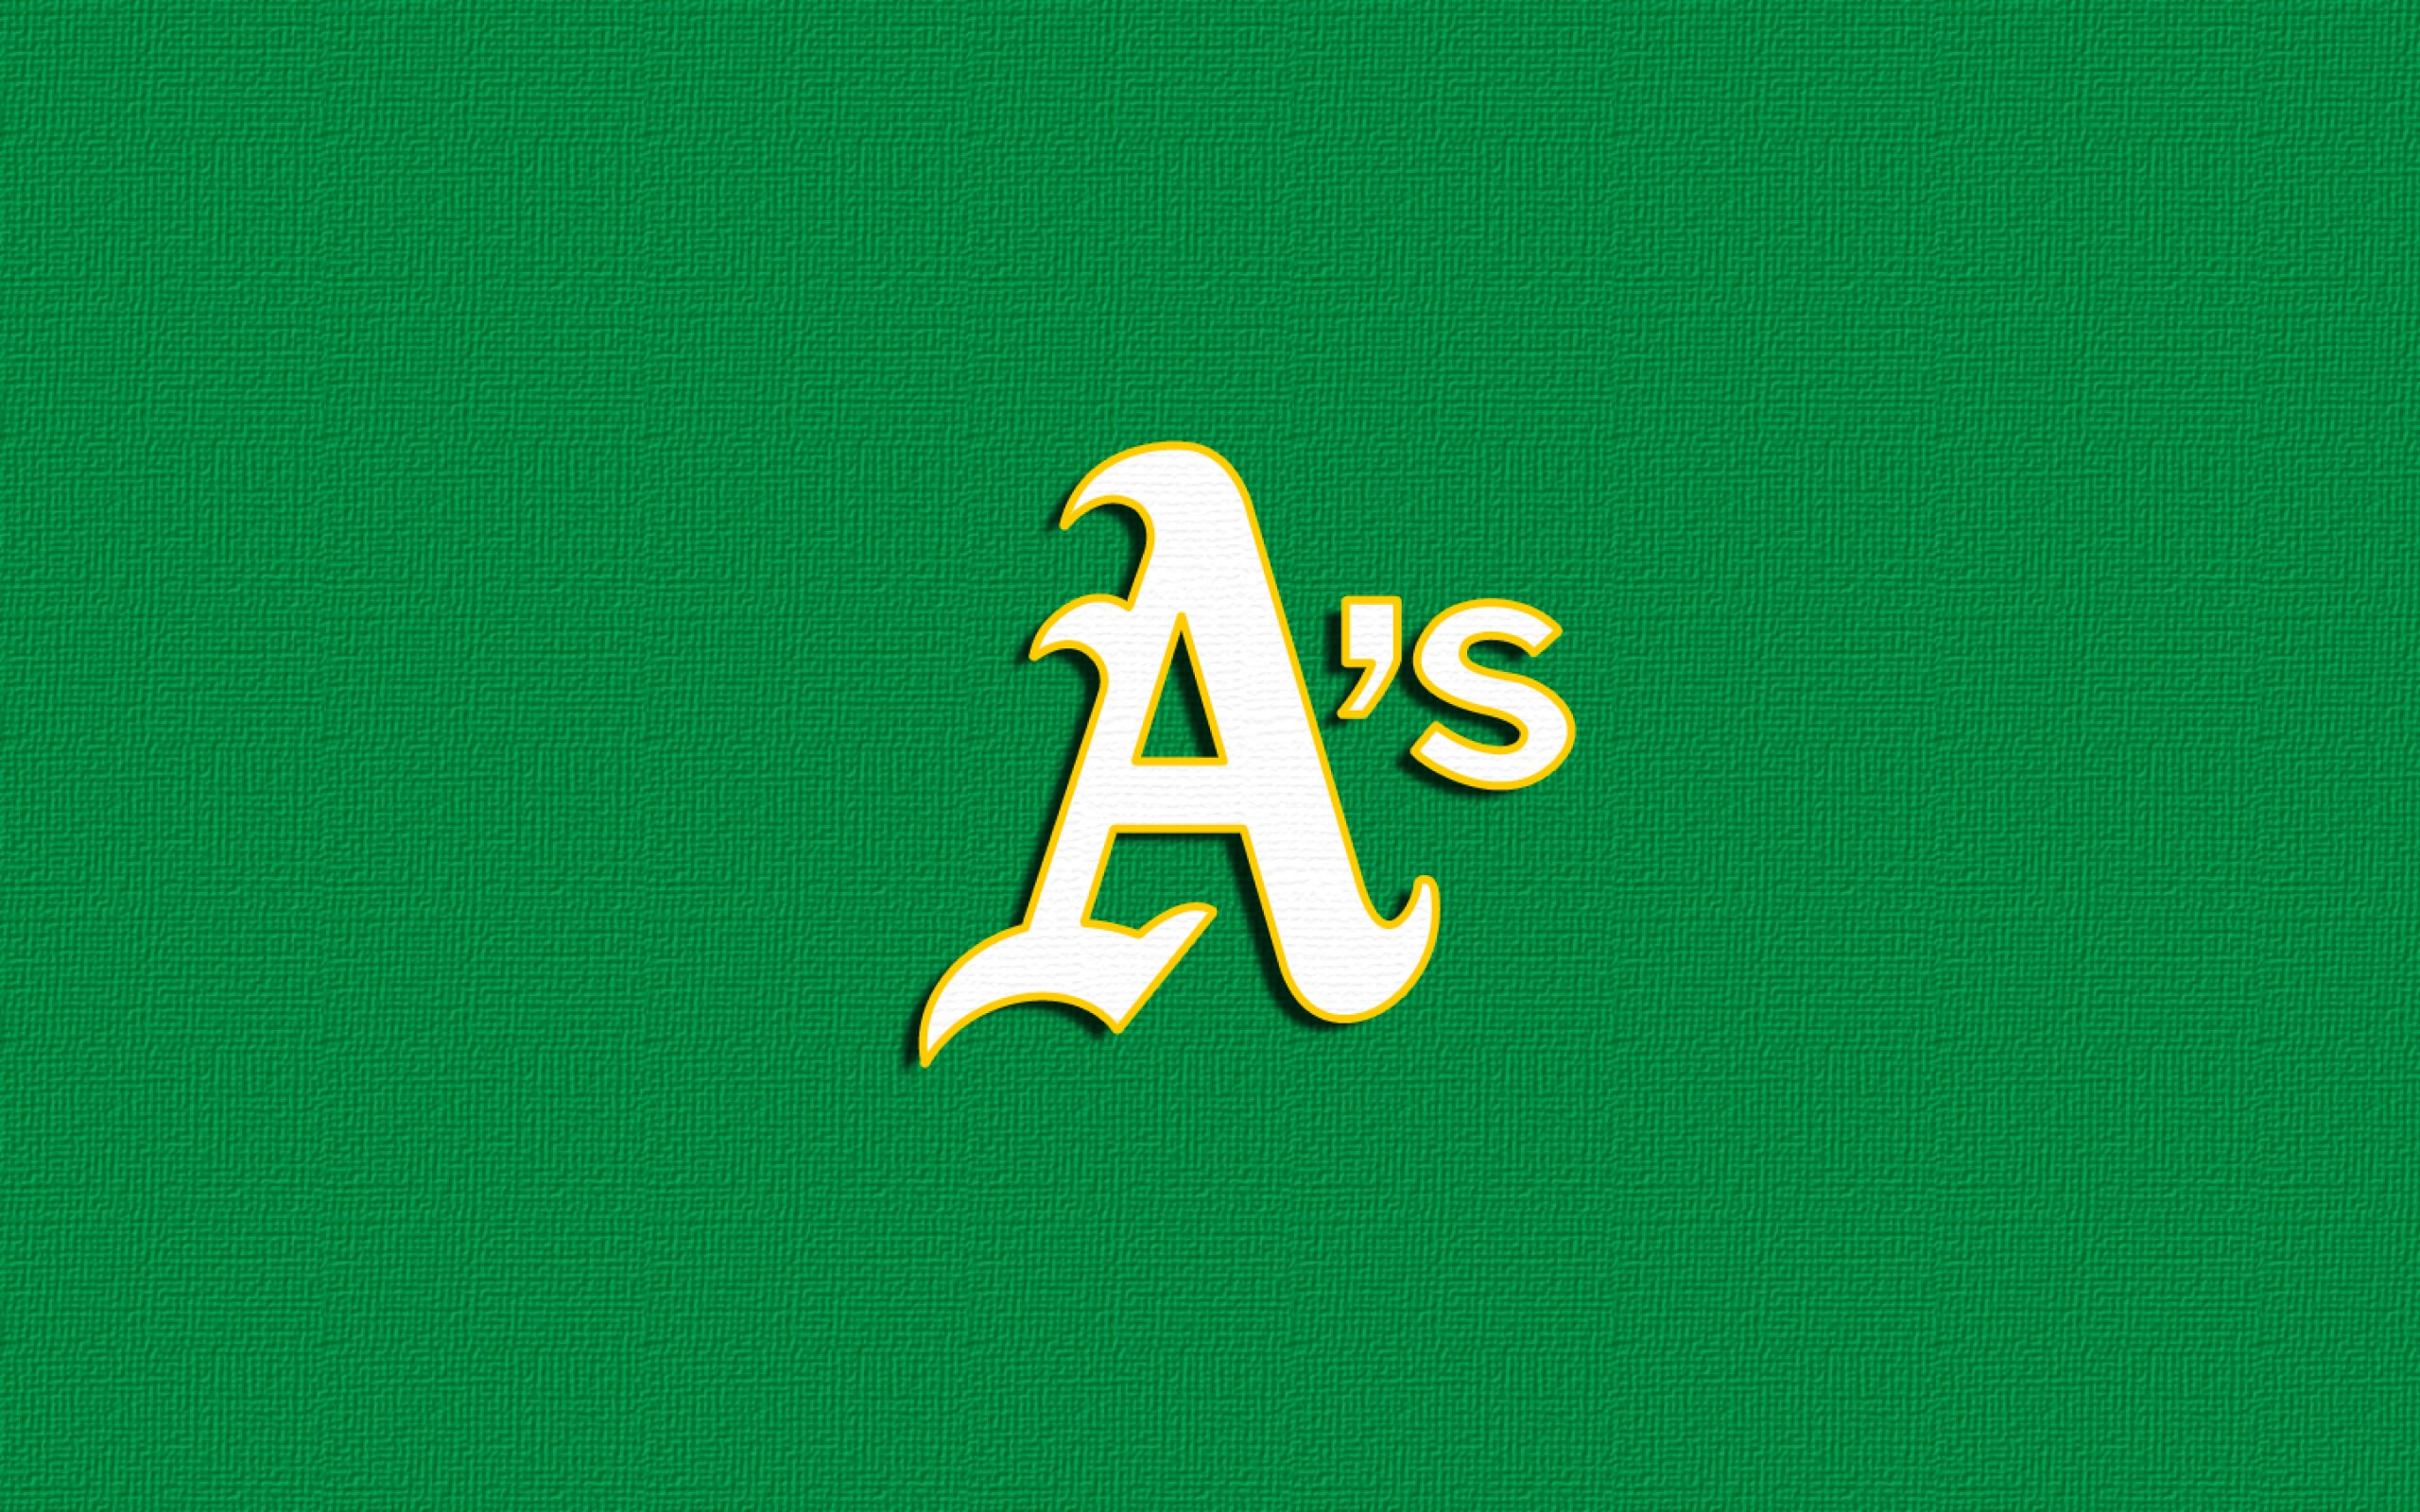 Oakland Athletics Wallpapers and Background Images stmednet